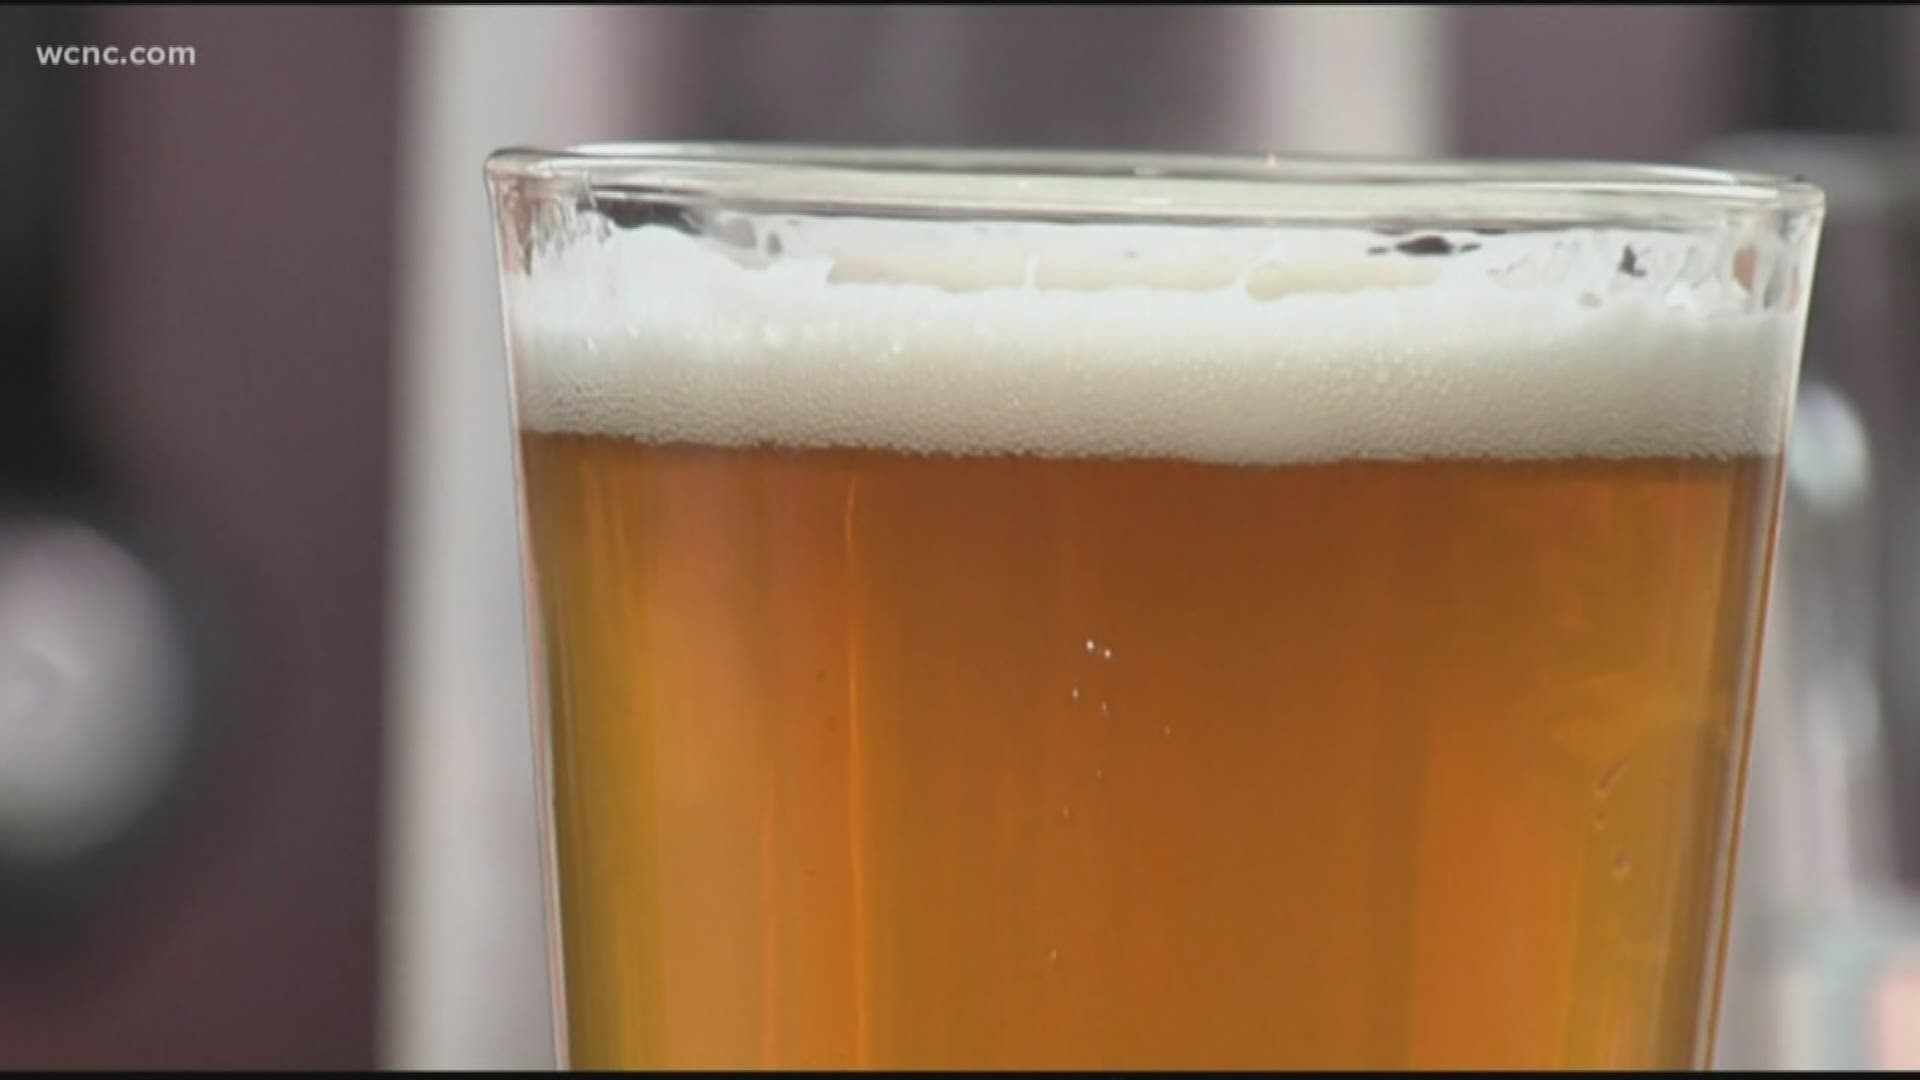 According to a new study, men who drink a half a pint per day of beer more than doubled their chances of living to 90 years old.